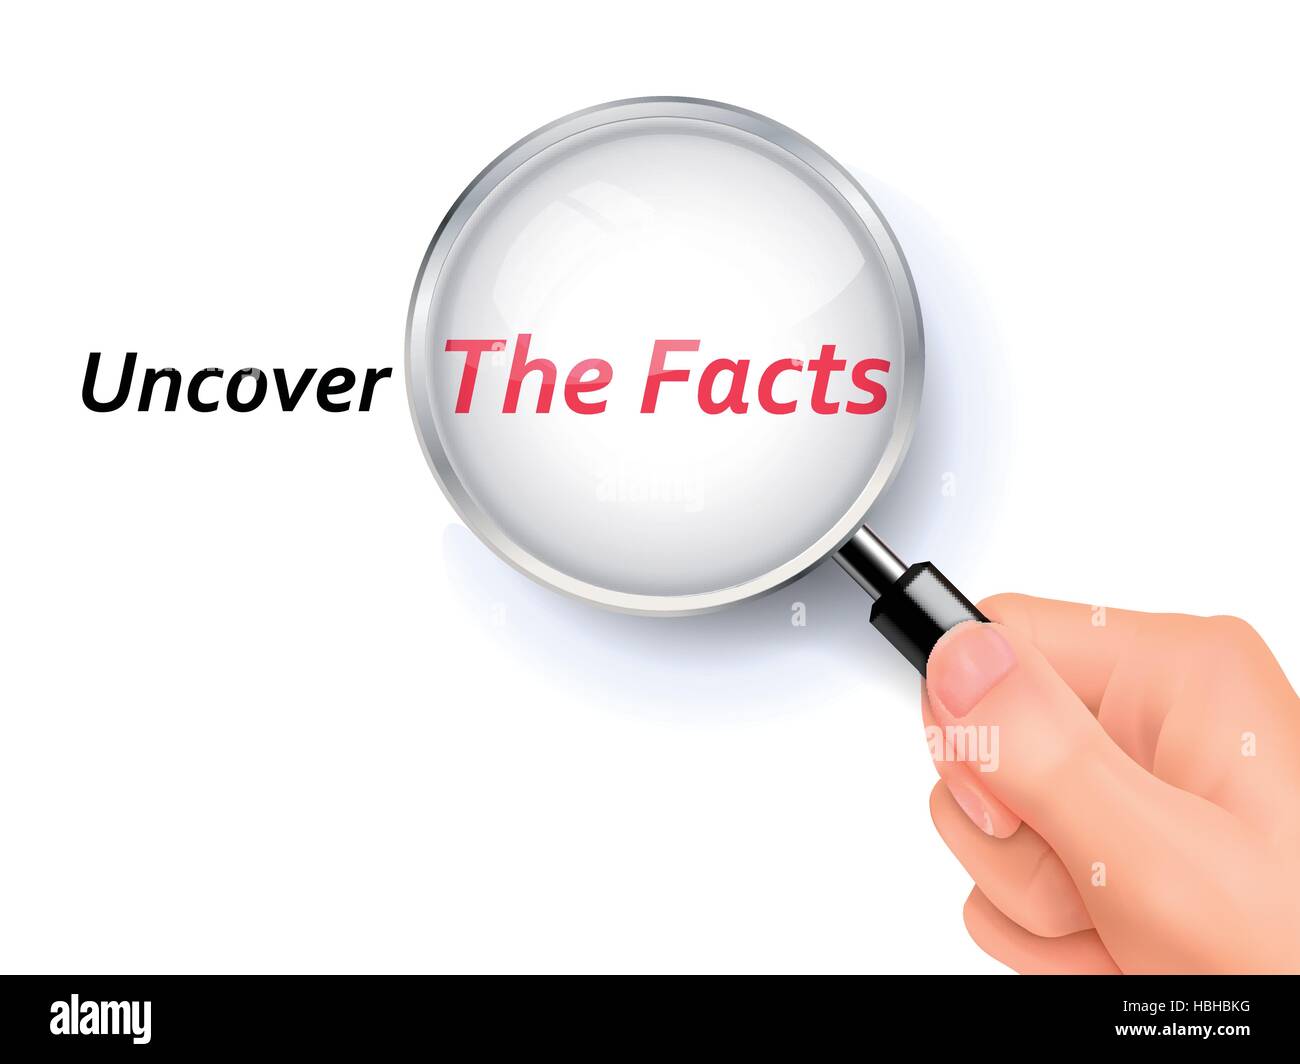 uncover the facts showing through magnifying glass held by hand Stock Vector